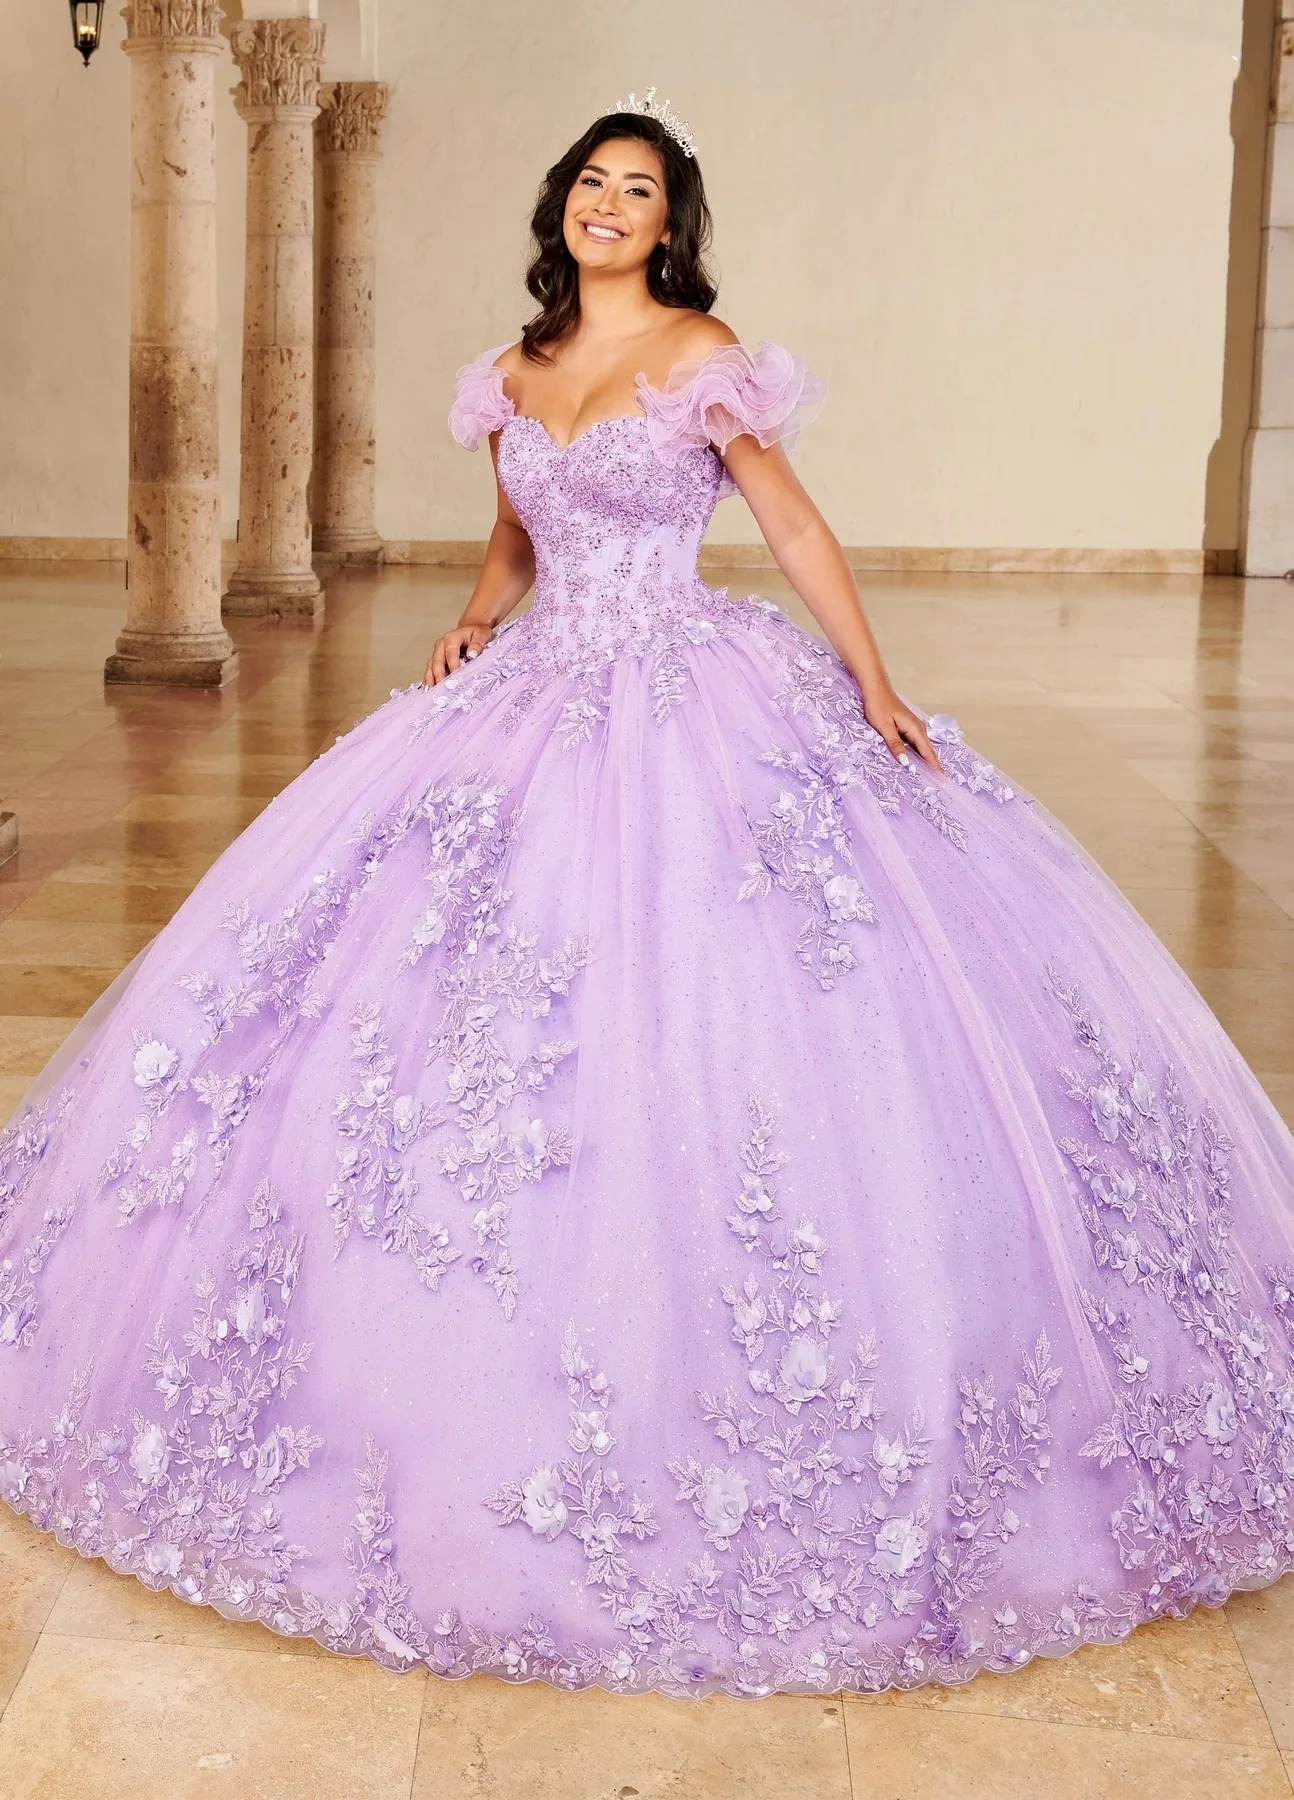 

Lilac Charro Quinceanera Dresses Ball Gown Sweetheart Tulle Appliques Beaded Puffy Mexican Sweet 16 Dresses 15 Anos